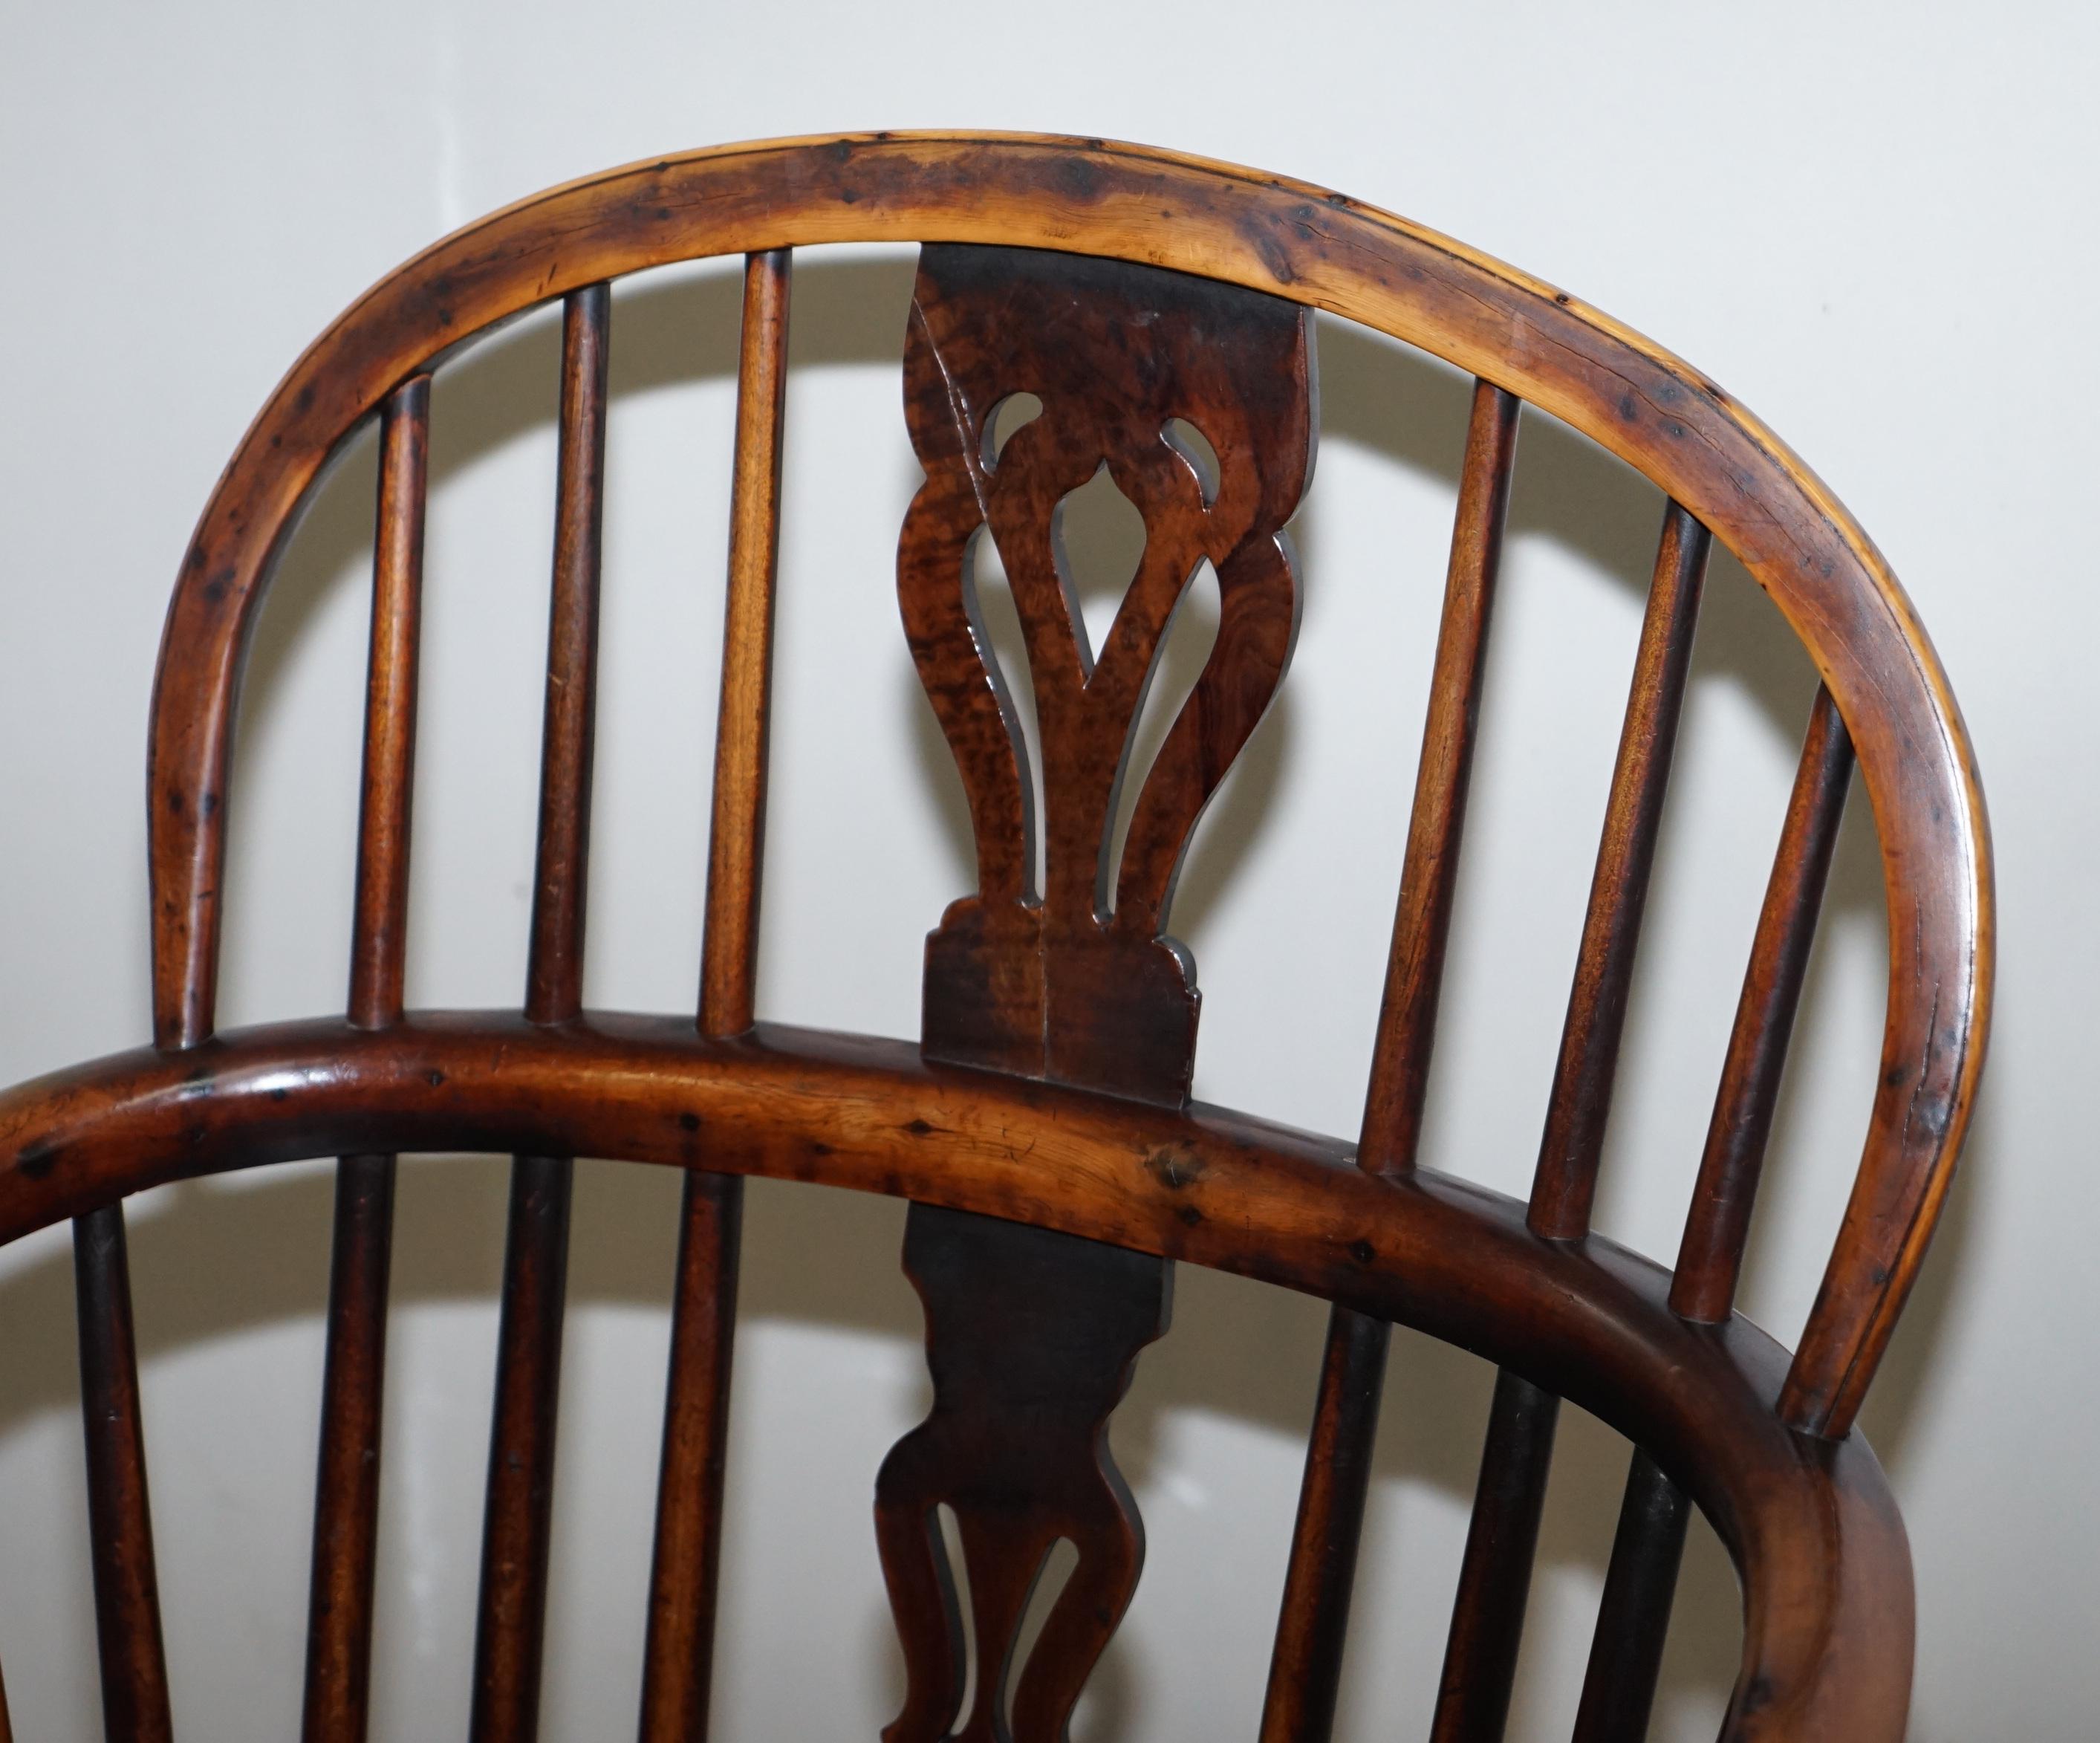 Hand-Crafted 1 of 6 Burr Yew Wood and Elm Windsor Armchairs circa 1860 English Country House